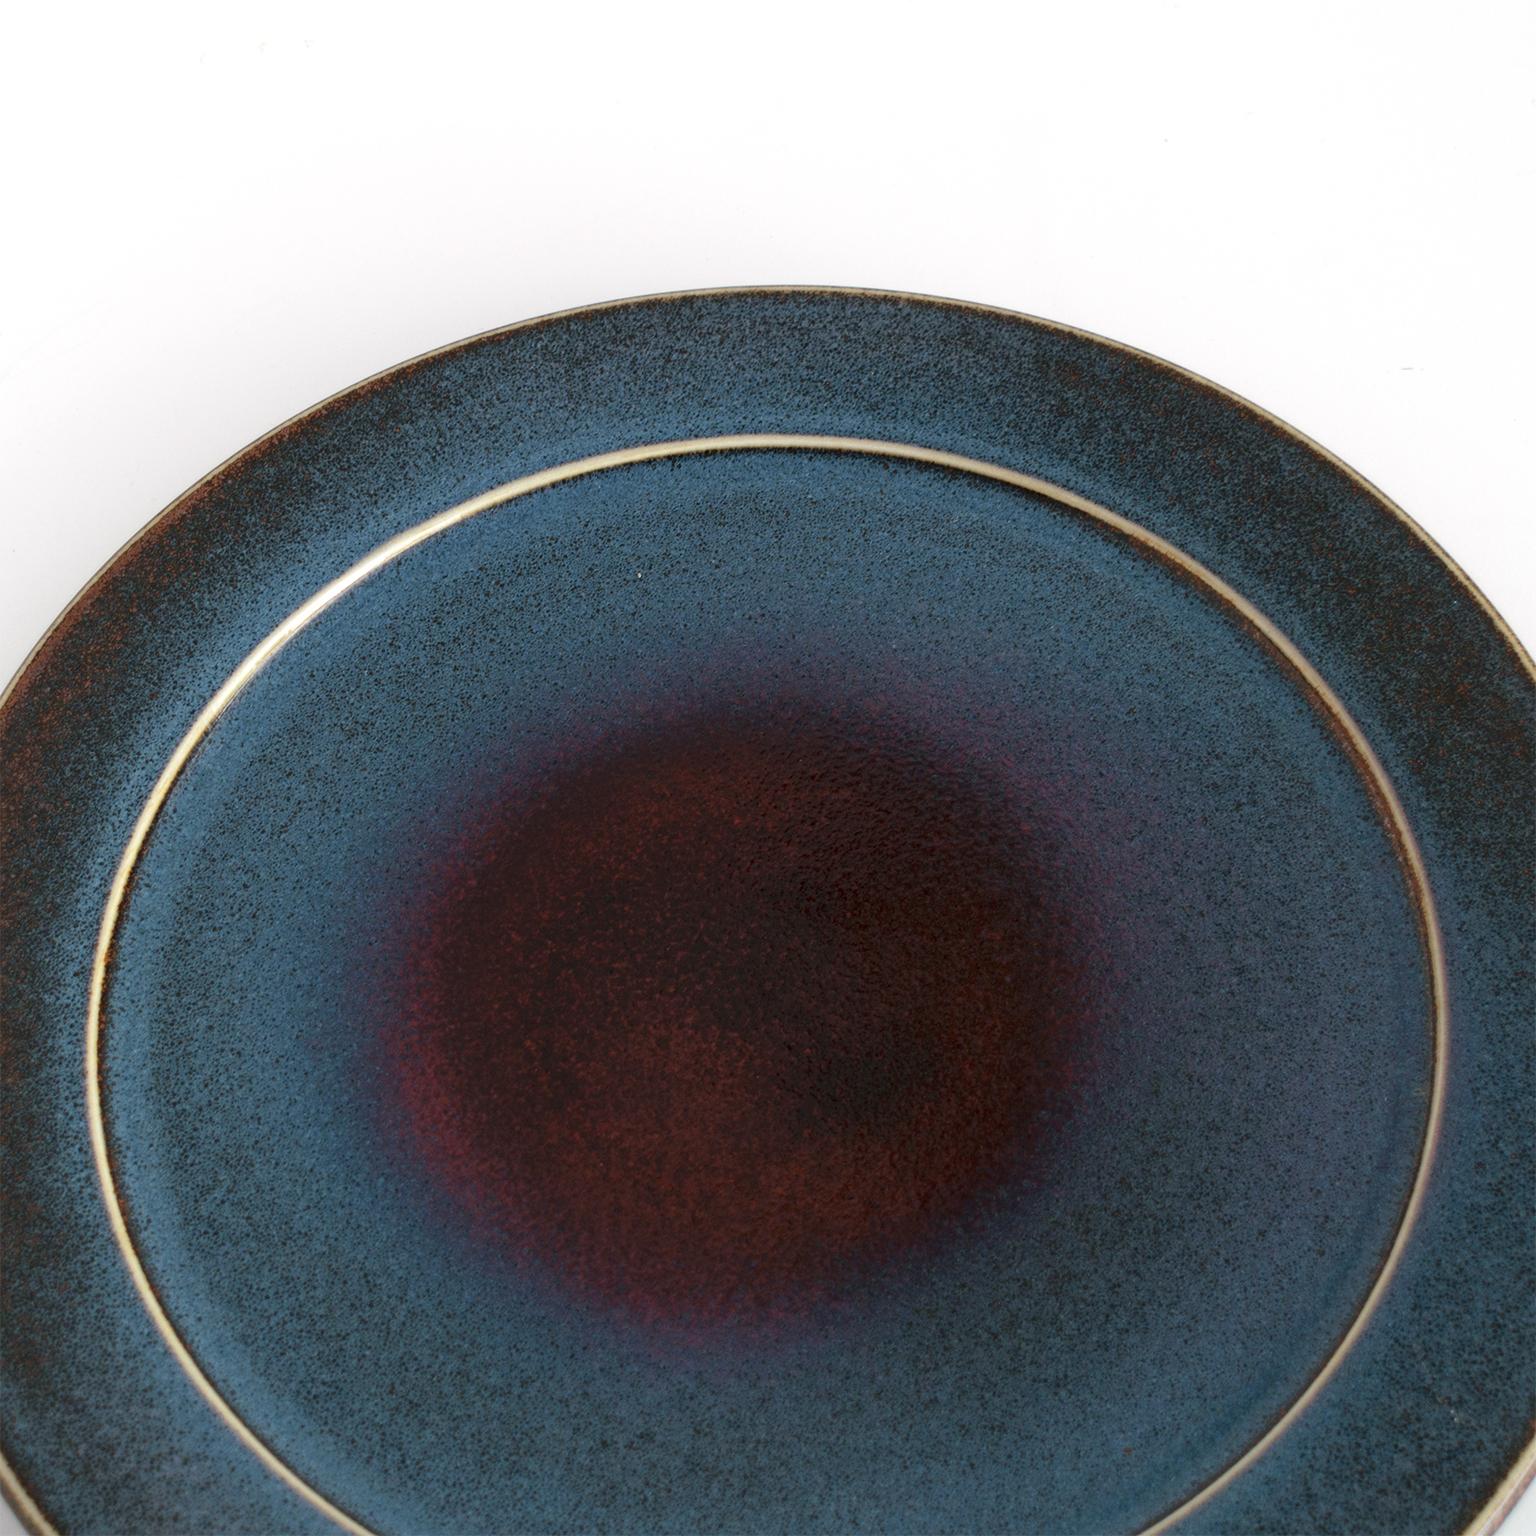 A unique Scandinavian Modern ceramic studio charger by Stig Lindberg for Gustavsberg. Signed and dated 1980.

Measures: Diameter 16.5